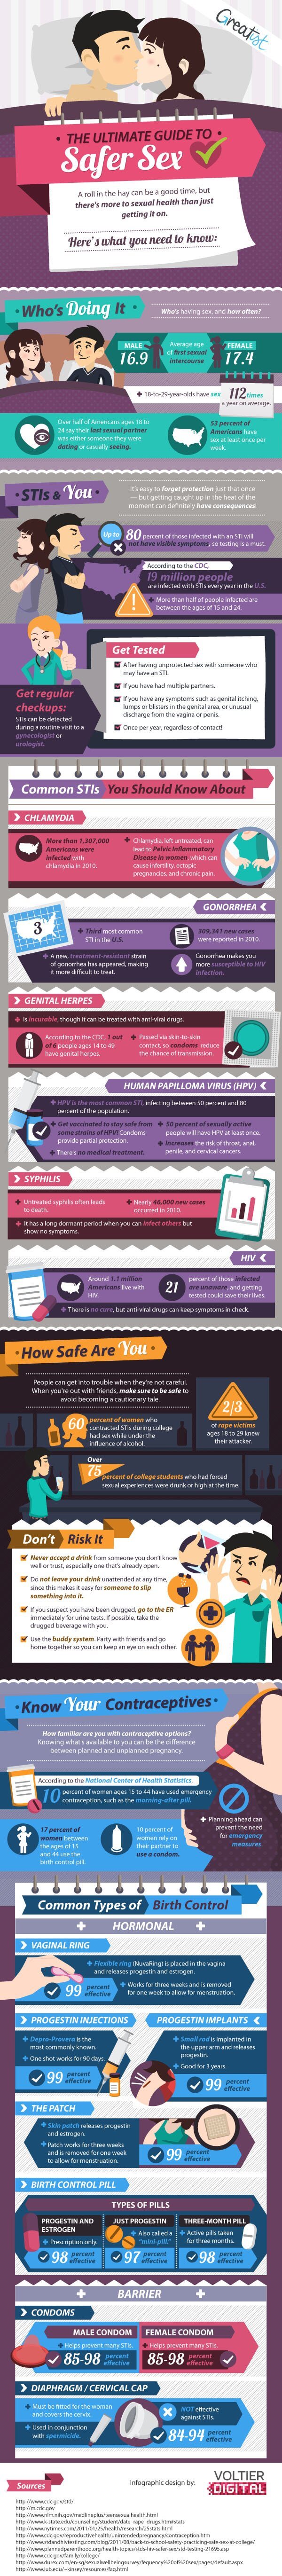 Safer Sex Guide Infographic